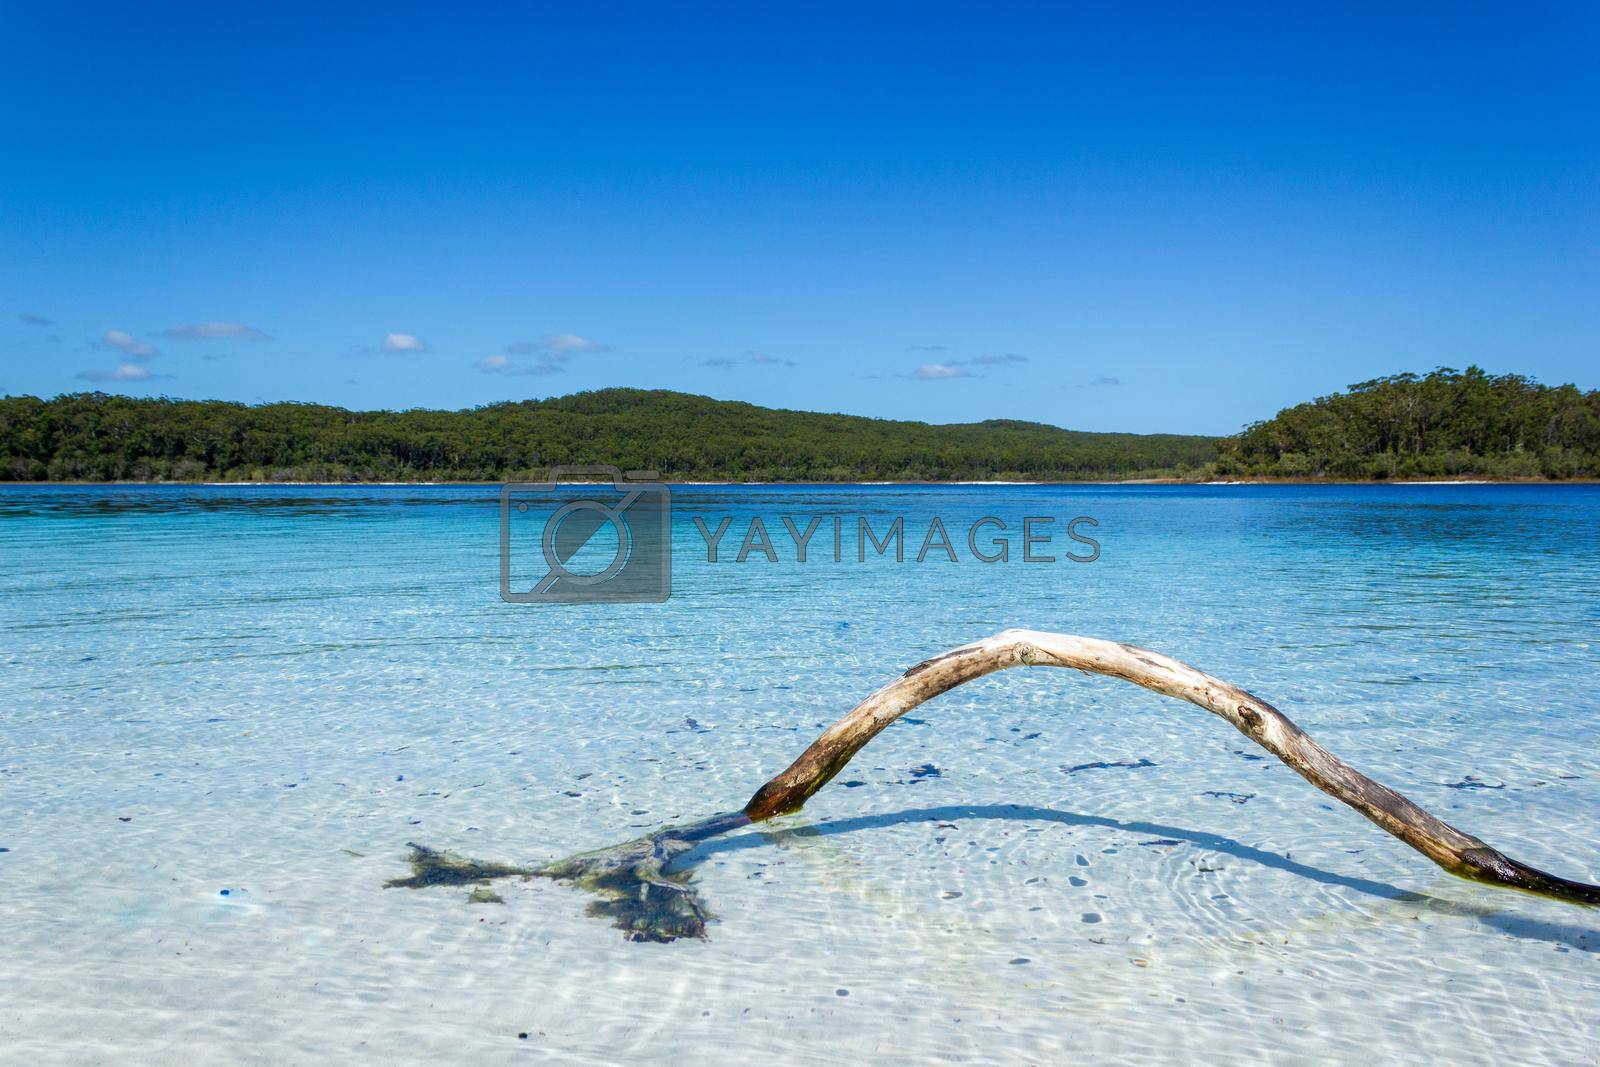 Royalty free image of Lake Mackenzie on Fraser Island off the Sunshine of Queensland is a beautiful freshwater lake popular with tourists who visit Fraser Island. Queensland, Australia by bettercallcurry